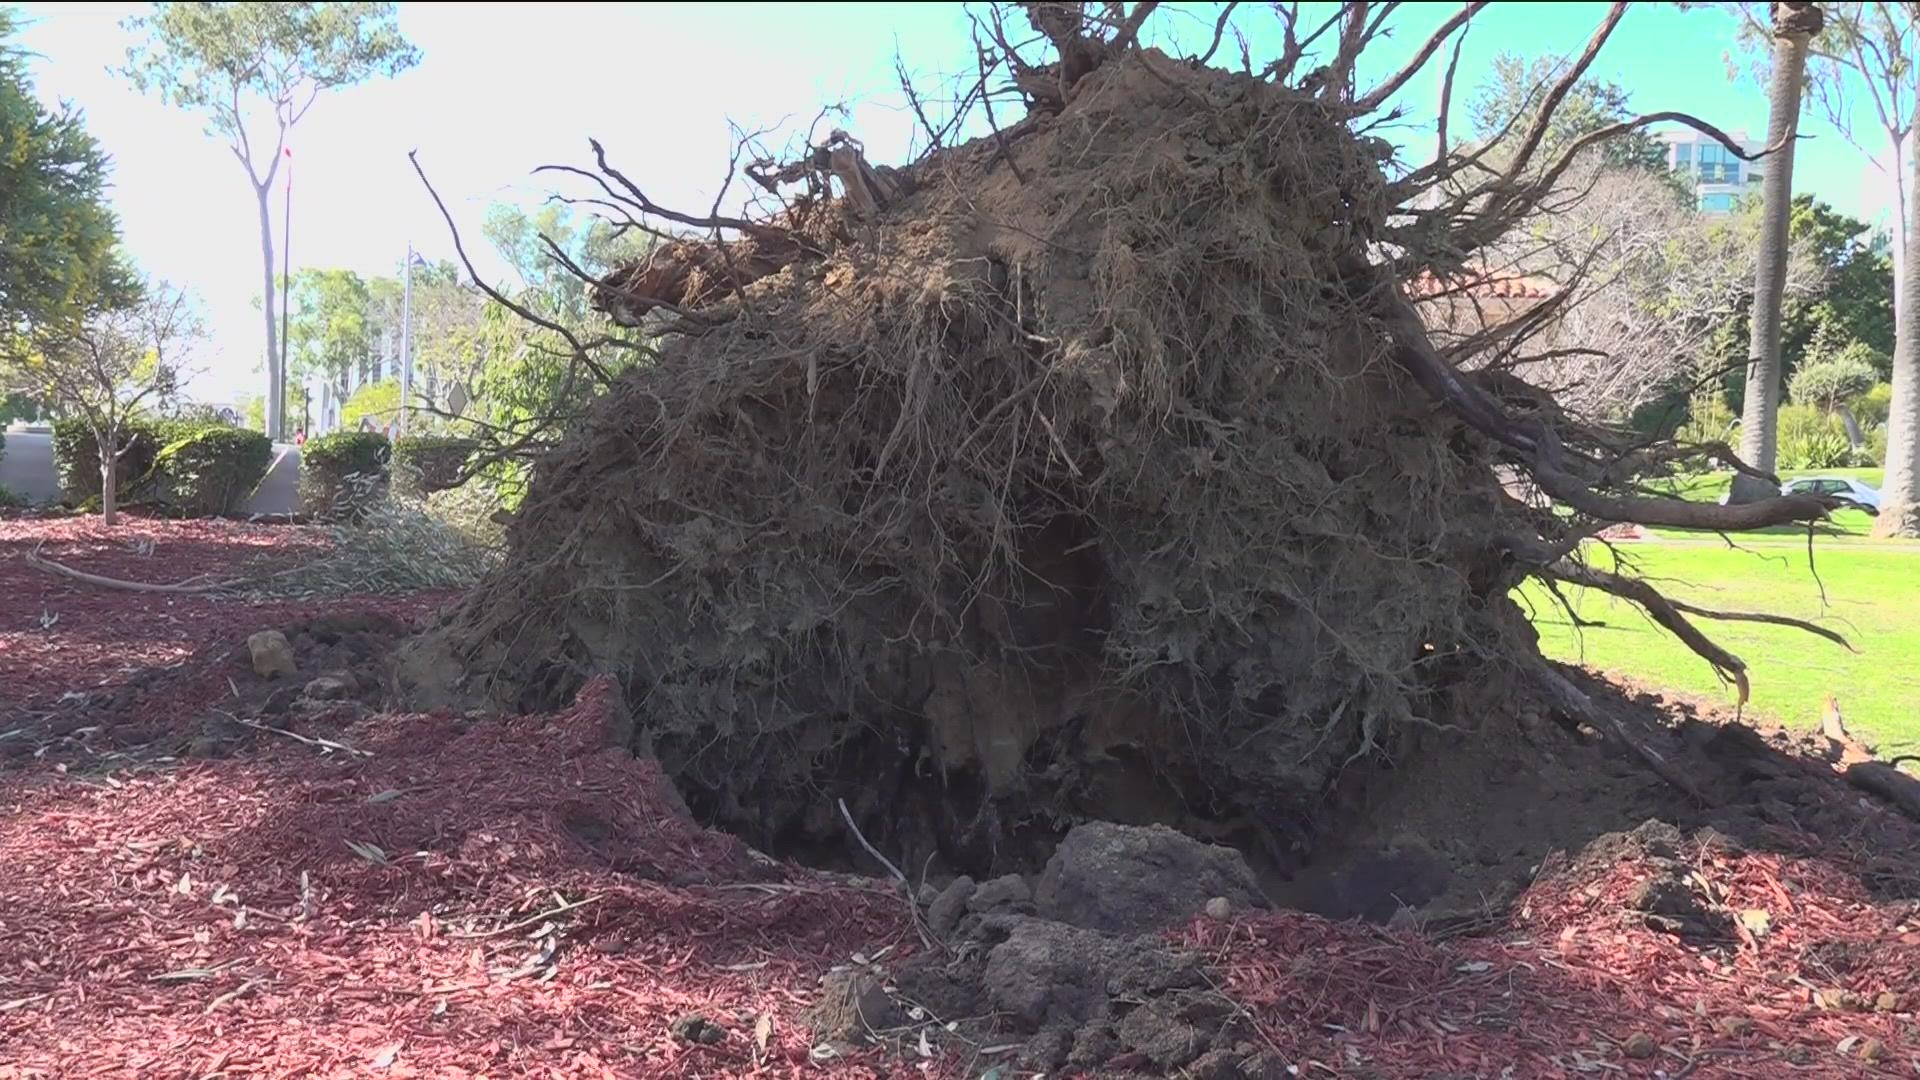 CBS 8 is Working For You to learn more about the previously ignored reports of decaying trees that toppled during this week's wind event.